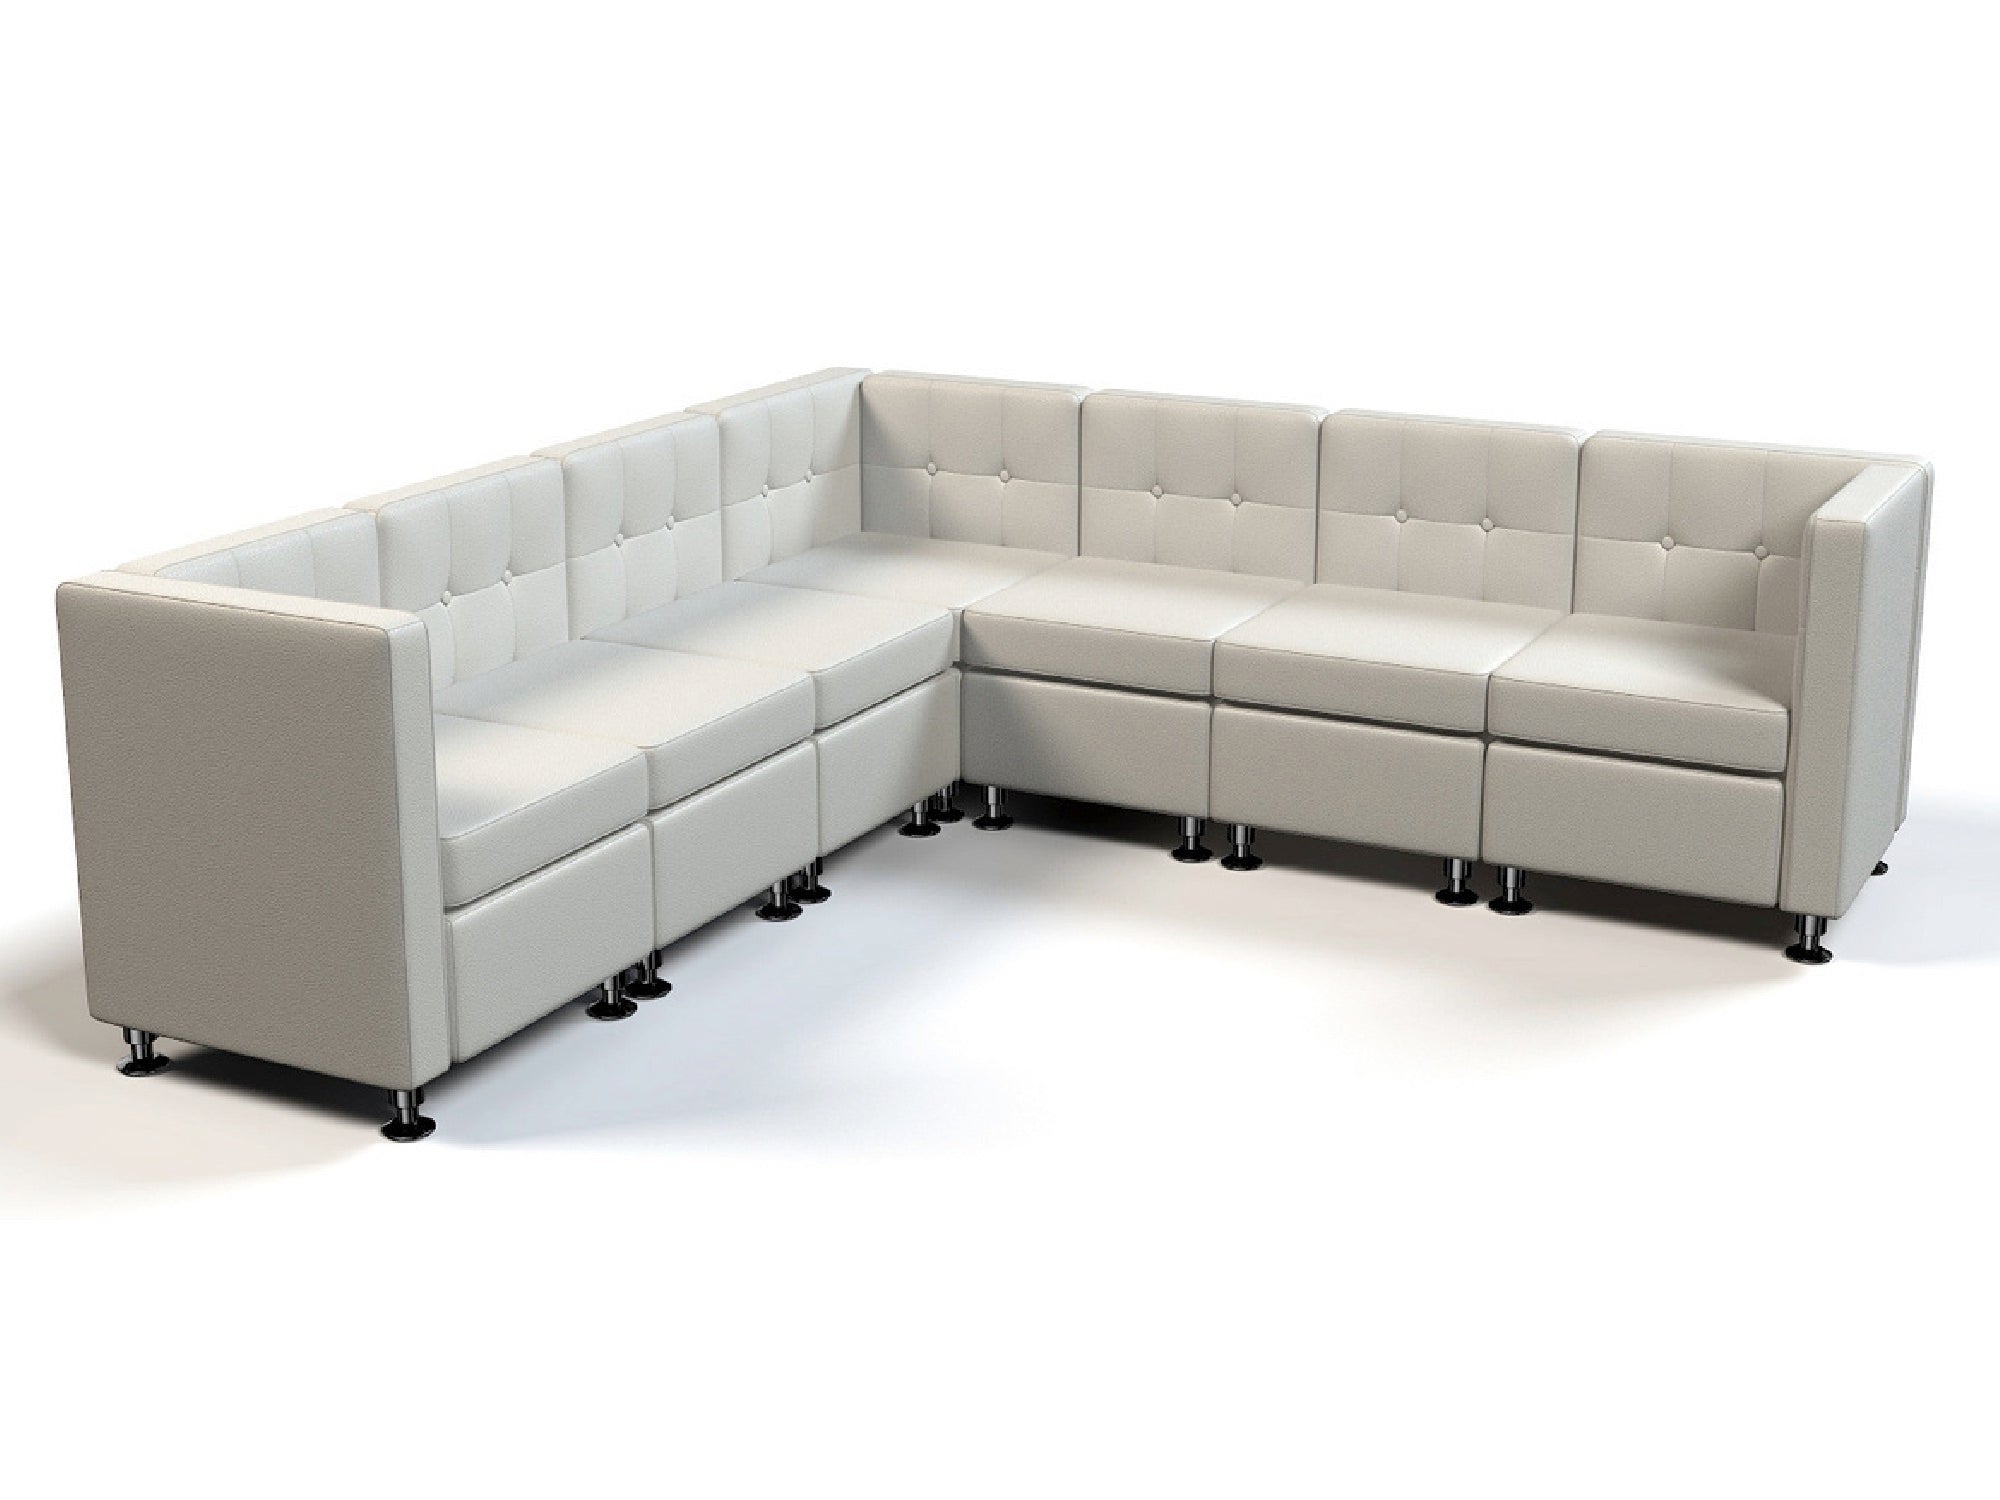 CLUB 7PC "L" SHAPED SECTIONAL - WHITE